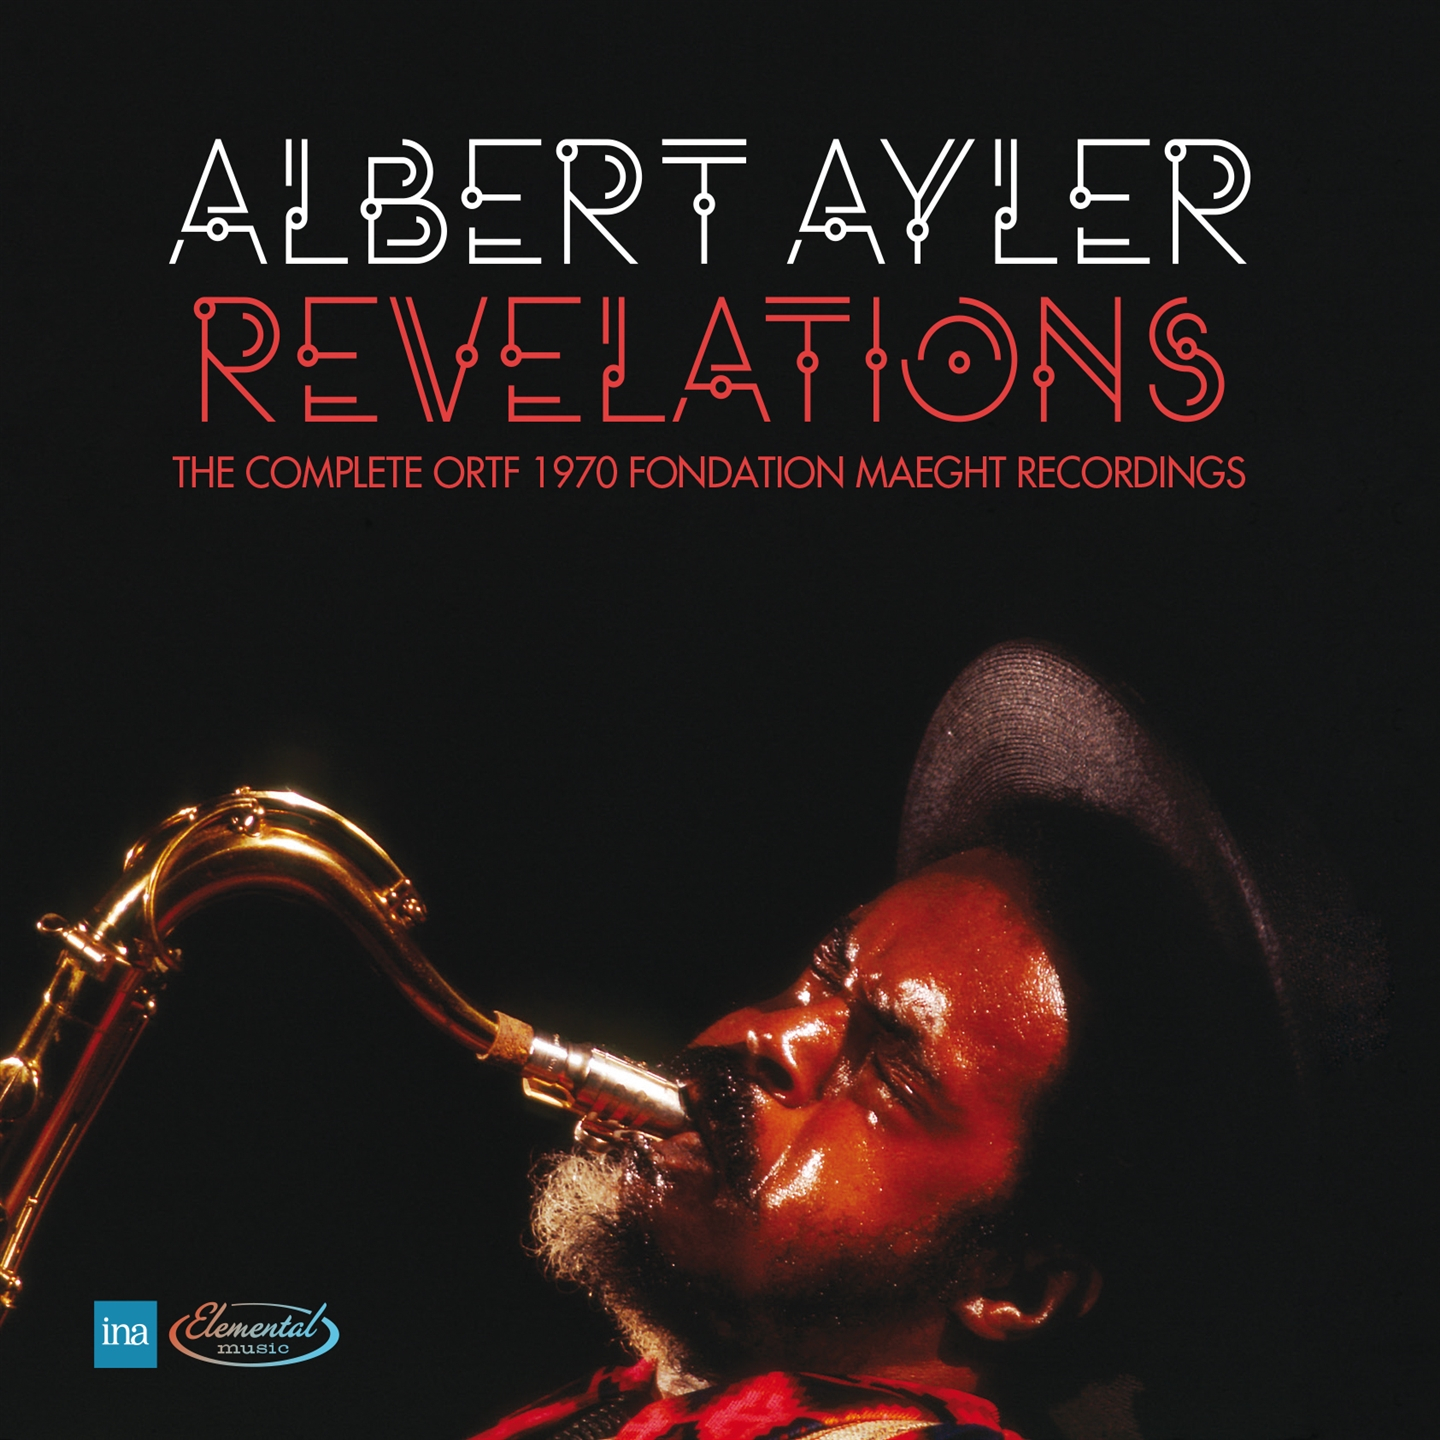 REVELATIONS. THE COMPLETE ORTF 1970 FONDATION MAEGHT RECORDINGS [4 CD]